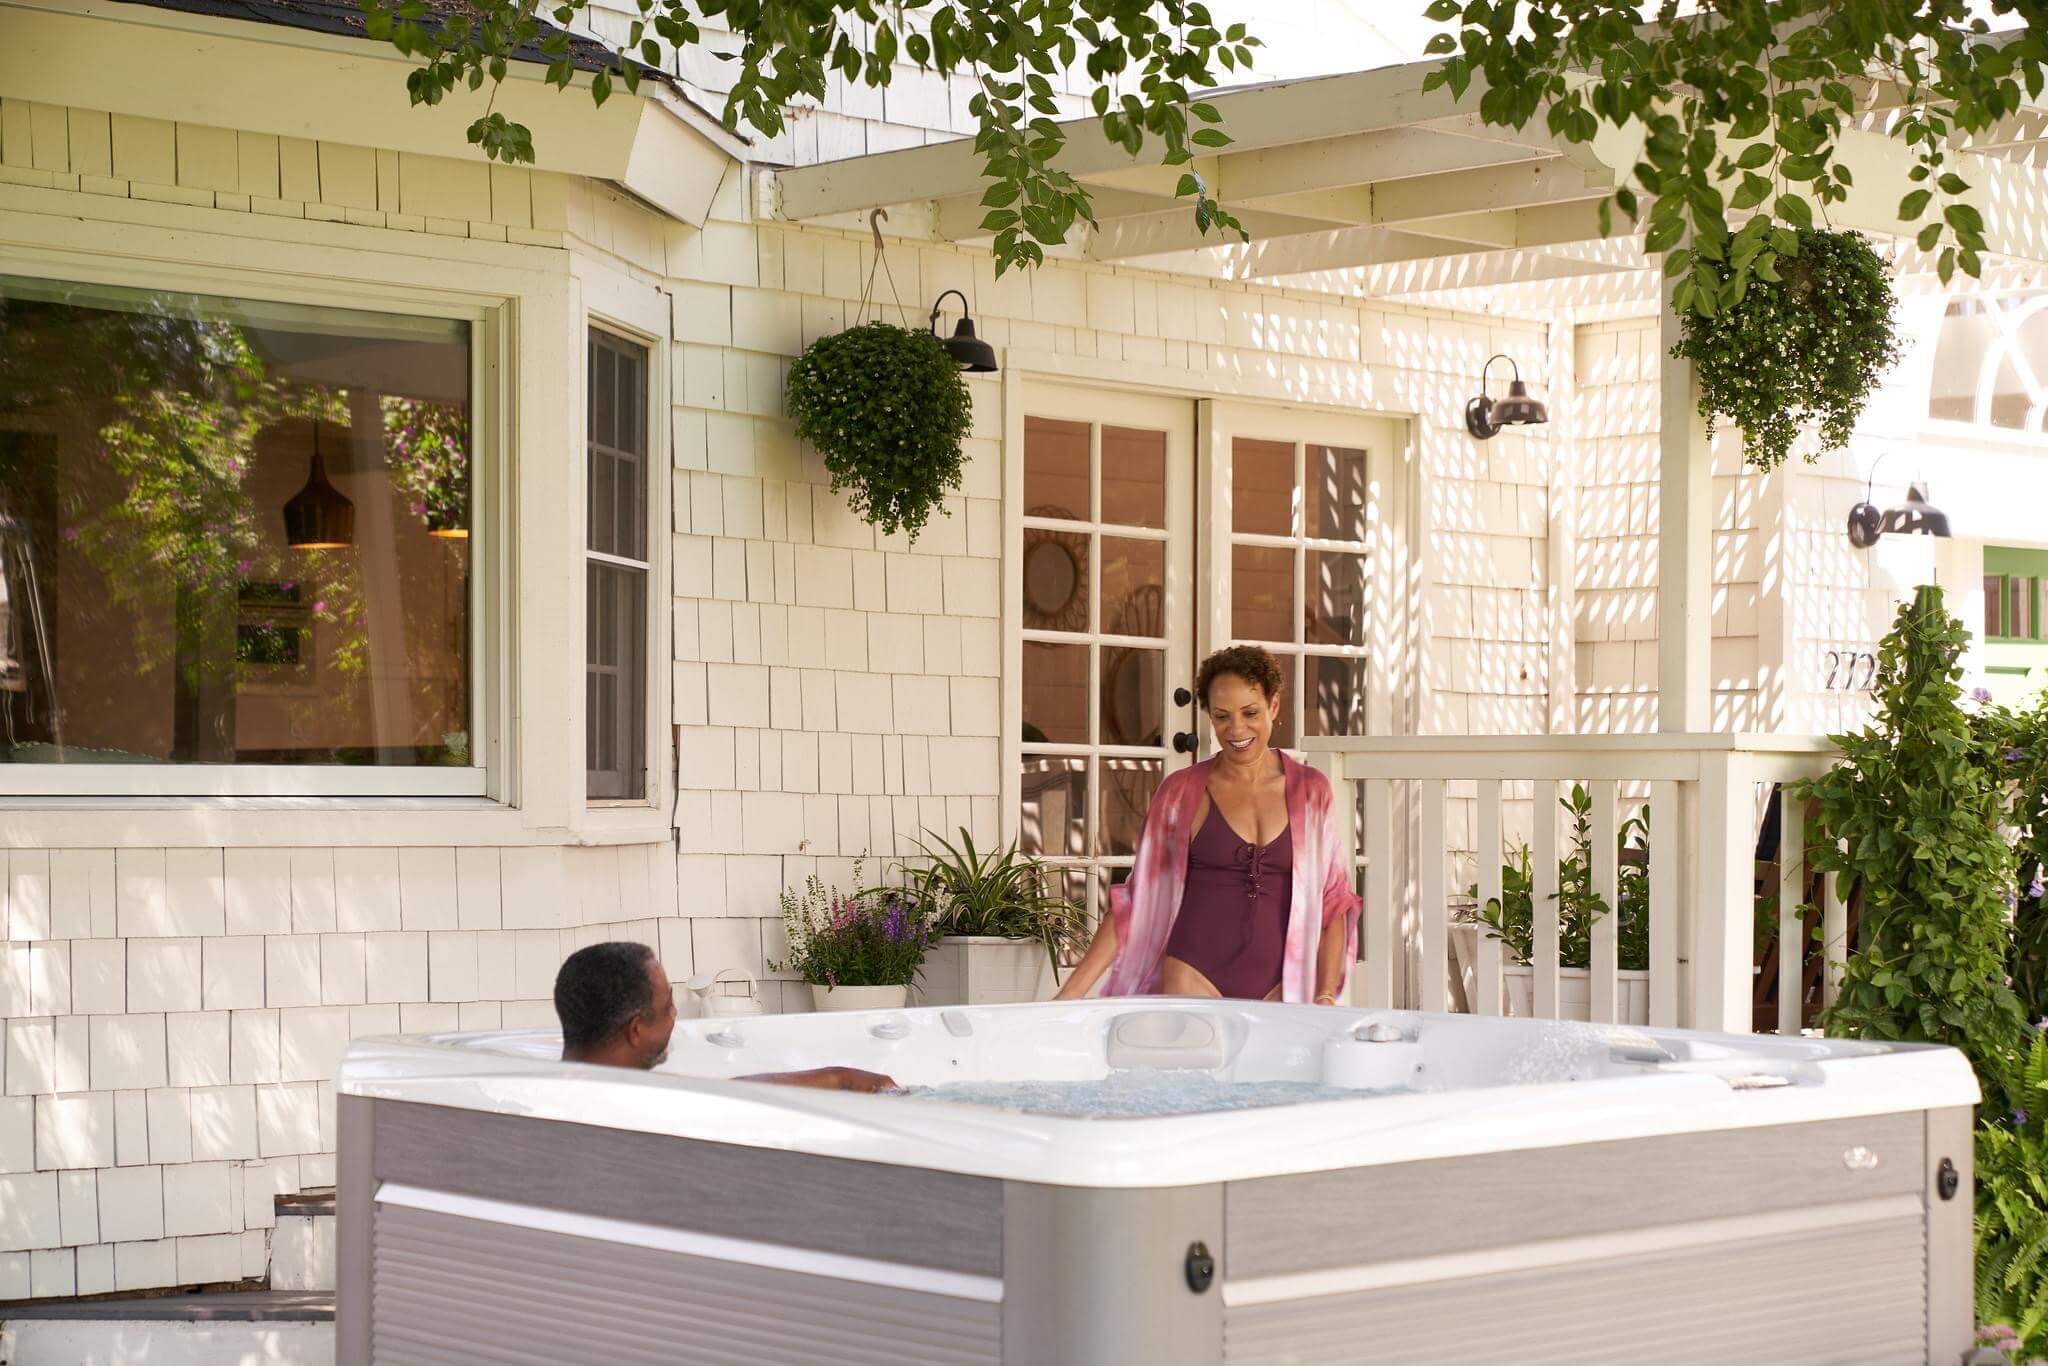 How Owning a Hot Tub Can Help You Renew & Refresh in the New Year